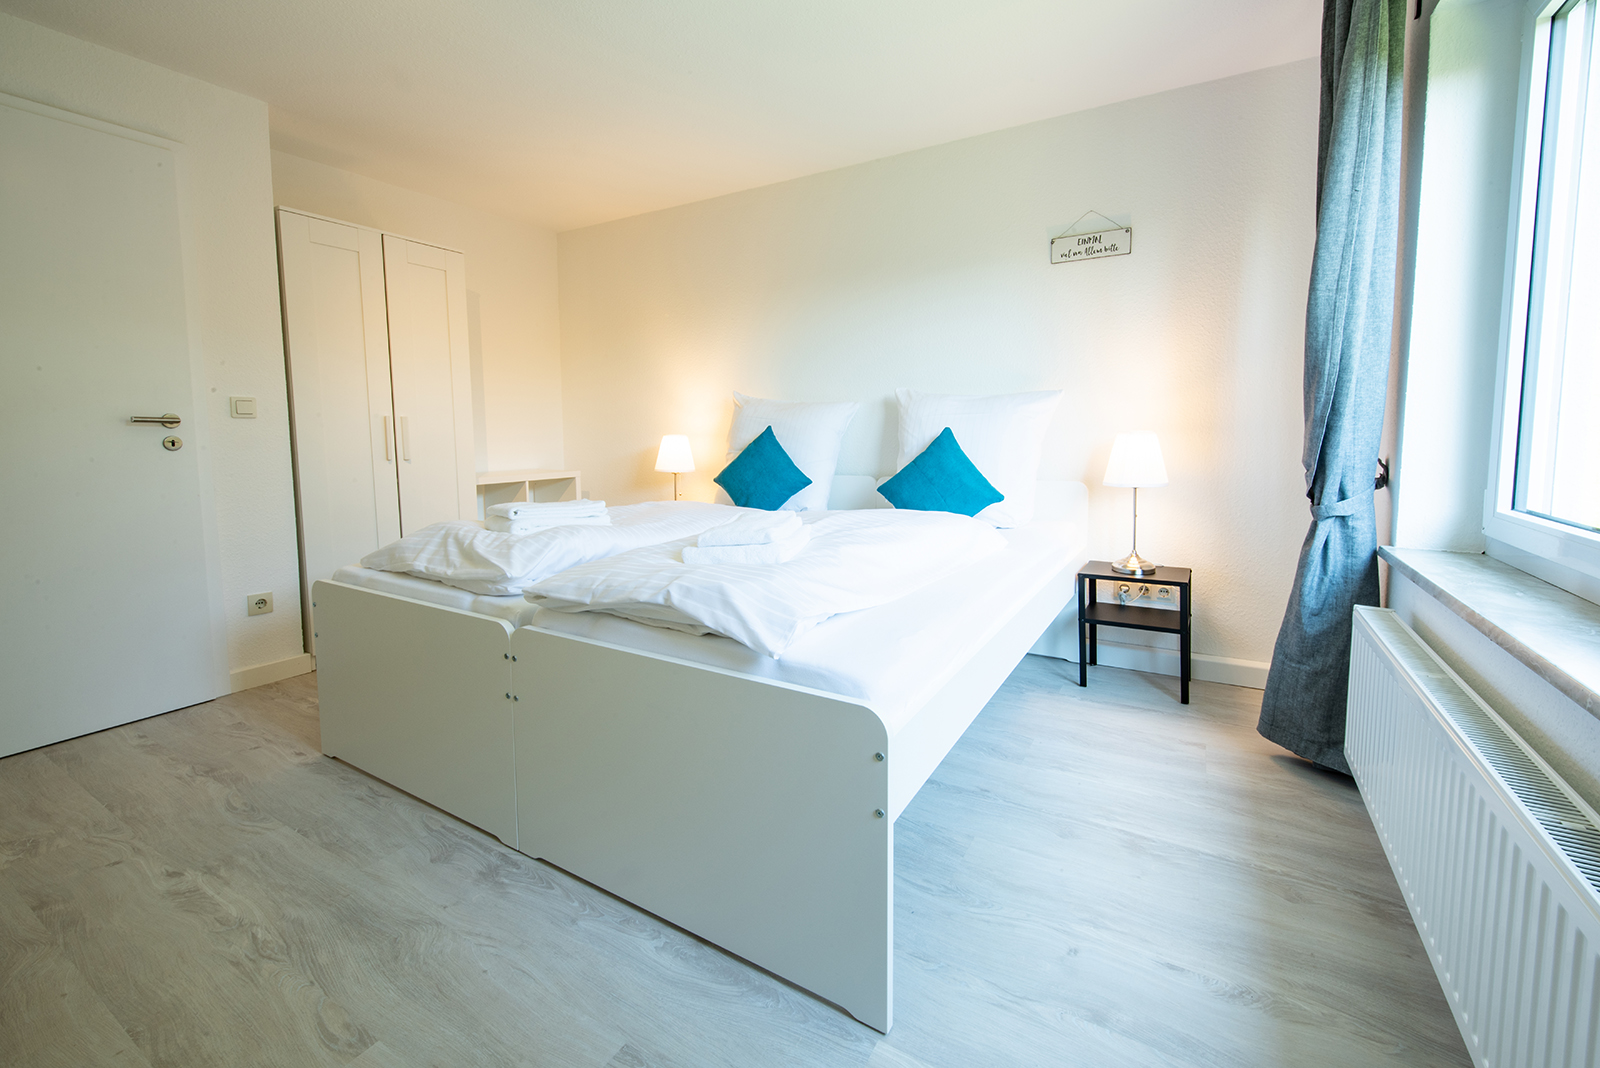 Holiday apartments on Lake Constance: Markdorf - Bedroom 2